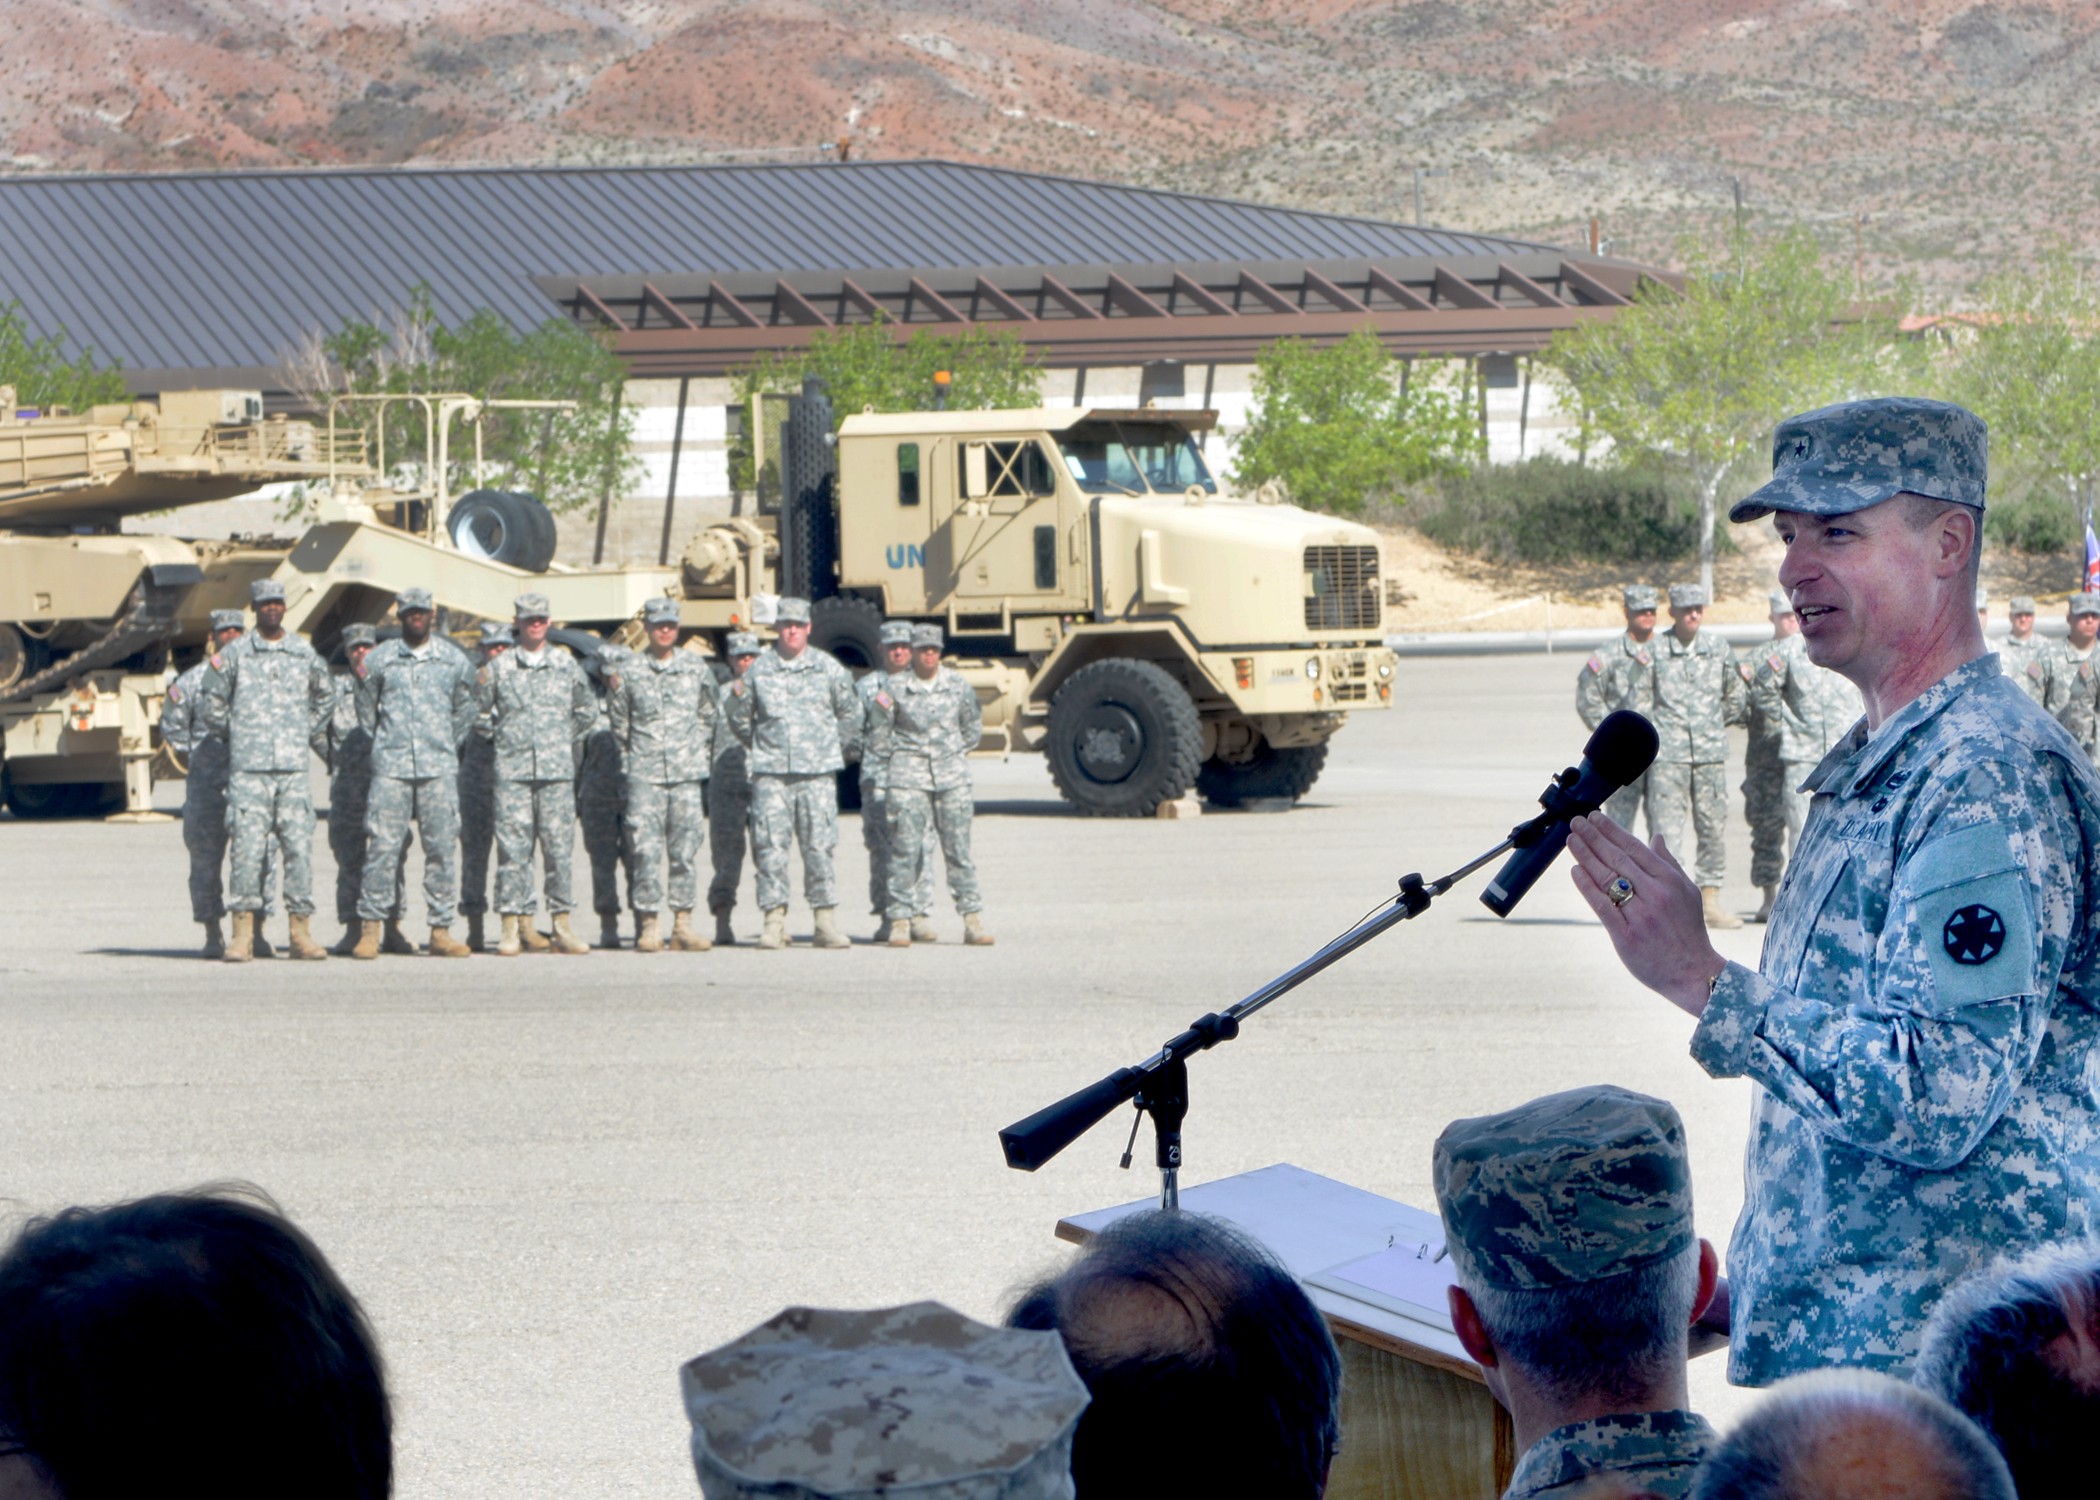 New commander at helm of NTC, Fort Irwin | Article | The United States Army